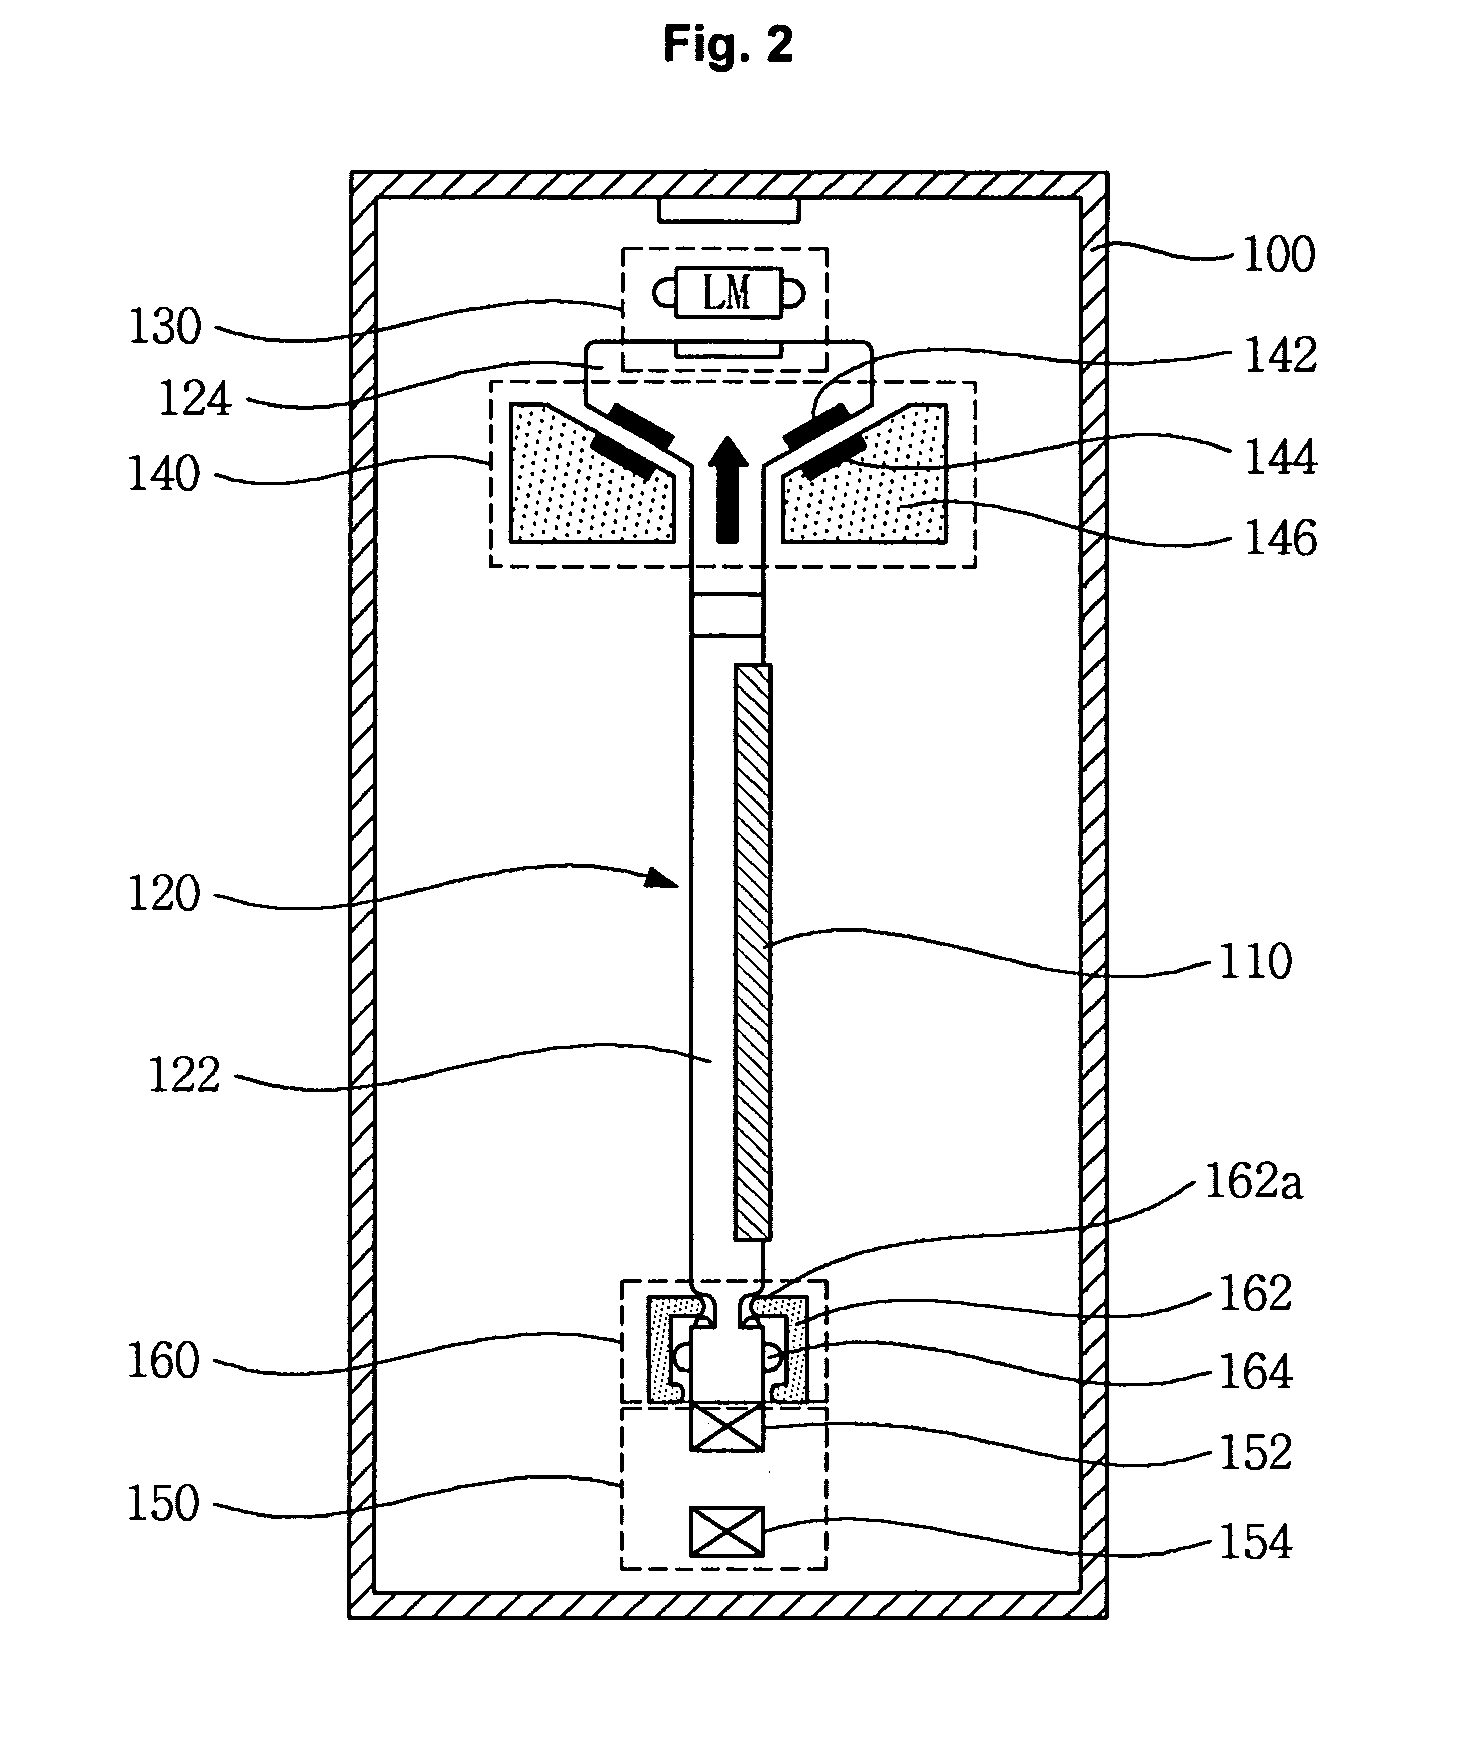 Apparatus for transferring substrates